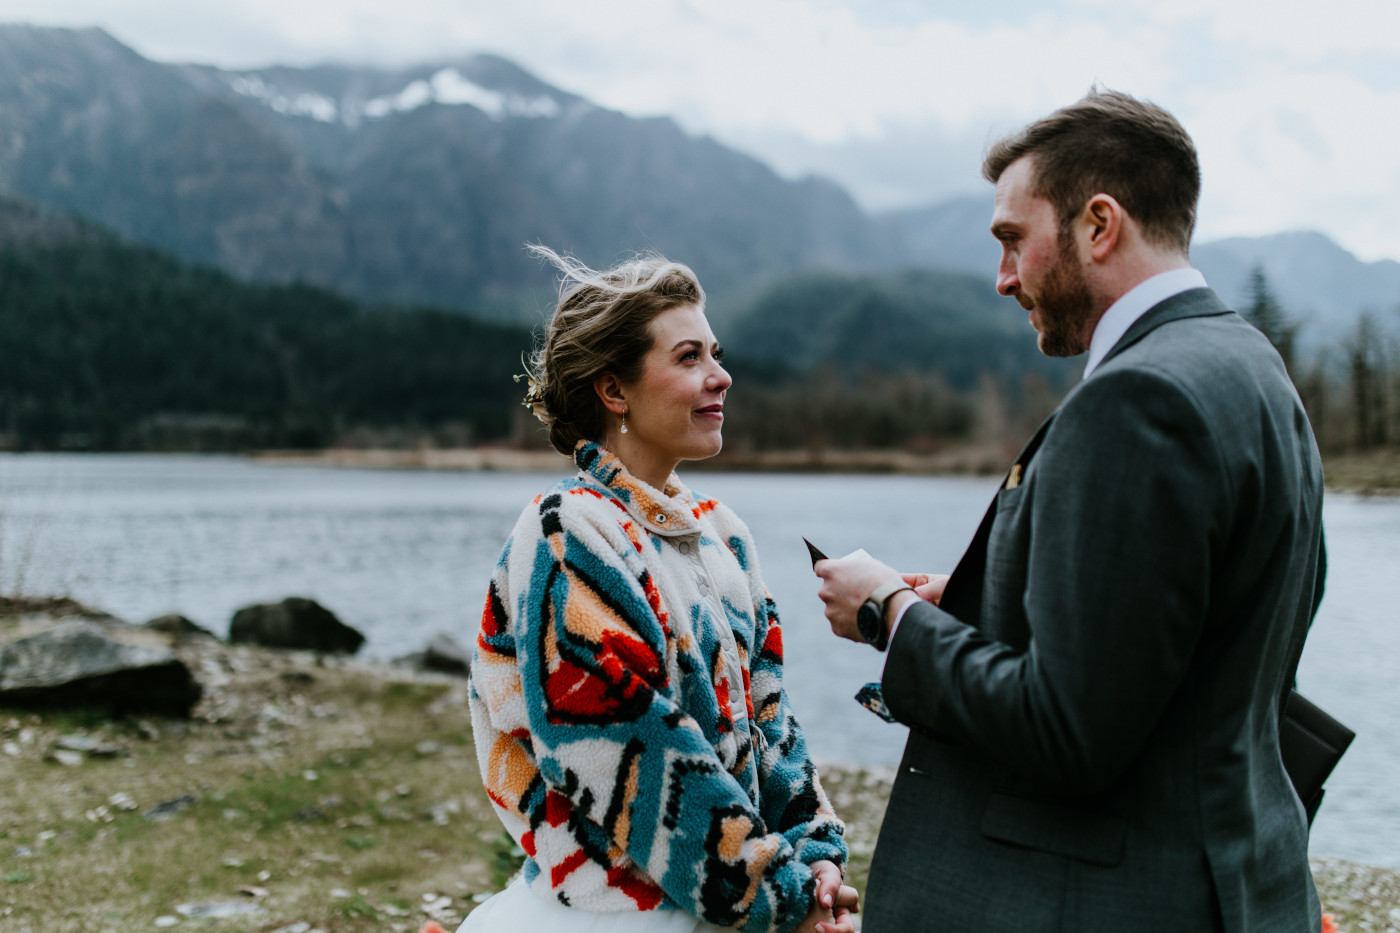 Lennie reads to Allison. Elopement photography at Columbia River Gorge by Sienna Plus Josh.